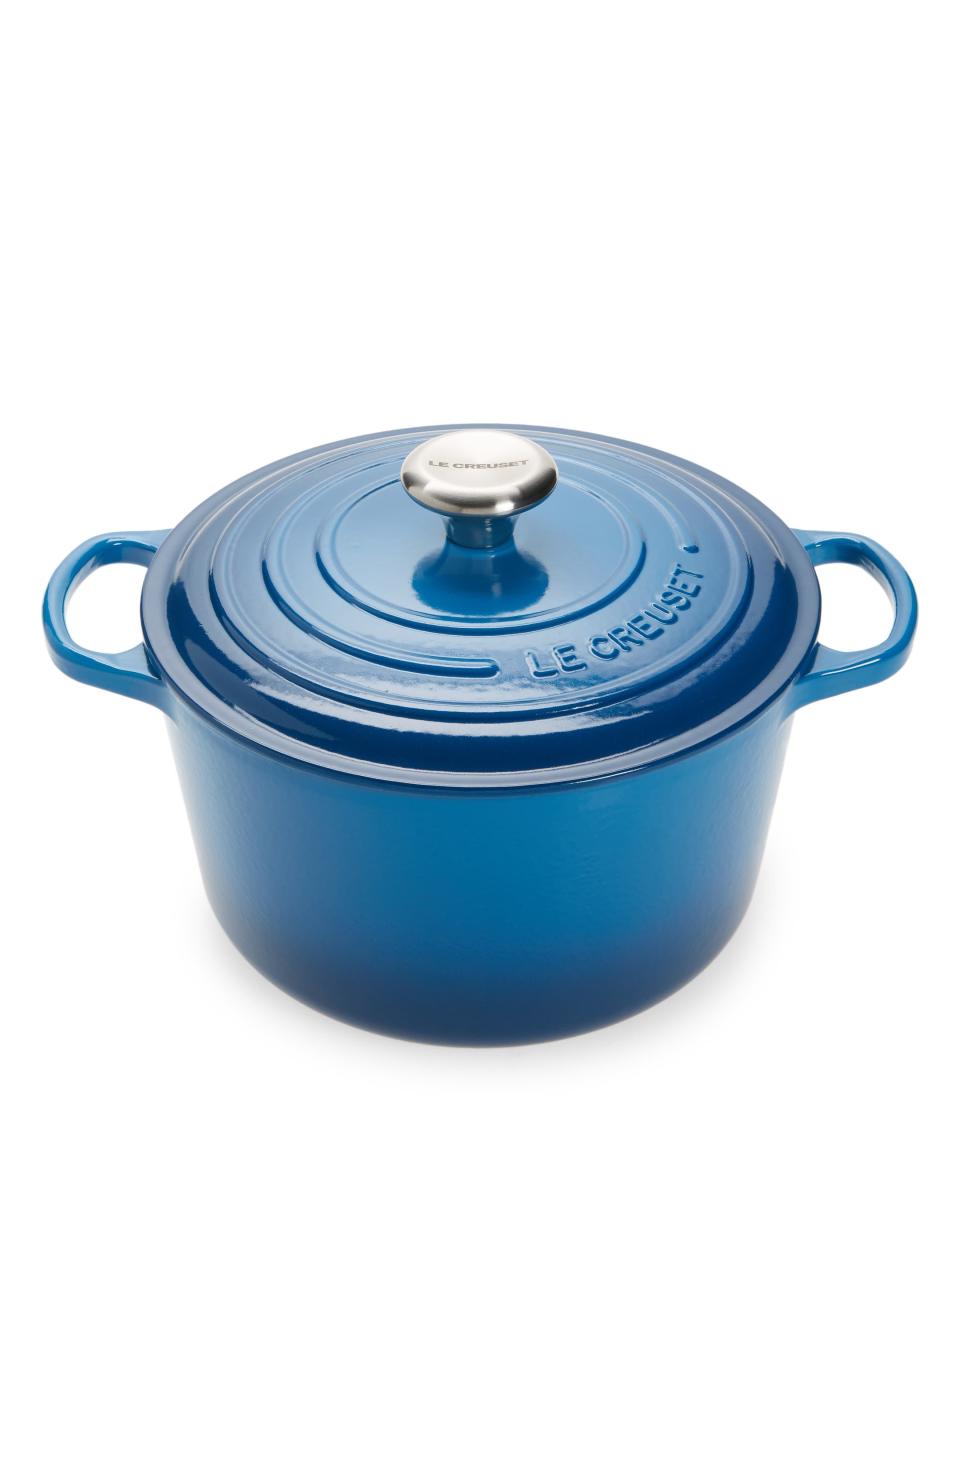 <p><strong>Le Creuset</strong></p><p>nordstrom.com</p><p><a href="https://go.redirectingat.com?id=74968X1596630&url=https%3A%2F%2Fwww.nordstrom.com%2Fs%2F5-25-quart-deep-dutch-oven%2F6864775&sref=https%3A%2F%2Fwww.harpersbazaar.com%2Ffashion%2Ftrends%2Fg40227936%2Fnice-saves-june-8-2022%2F" rel="nofollow noopener" target="_blank" data-ylk="slk:Shop Now" class="link ">Shop Now</a></p><p><del>$380</del> <strong>$250 (34% OFF)</strong></p><p>Whether you're looking to fry, bake, or roast, we spotted a can't-miss deal on one of Le Creuset's cast iron dutch ovens for 34 percent off its original price. </p>